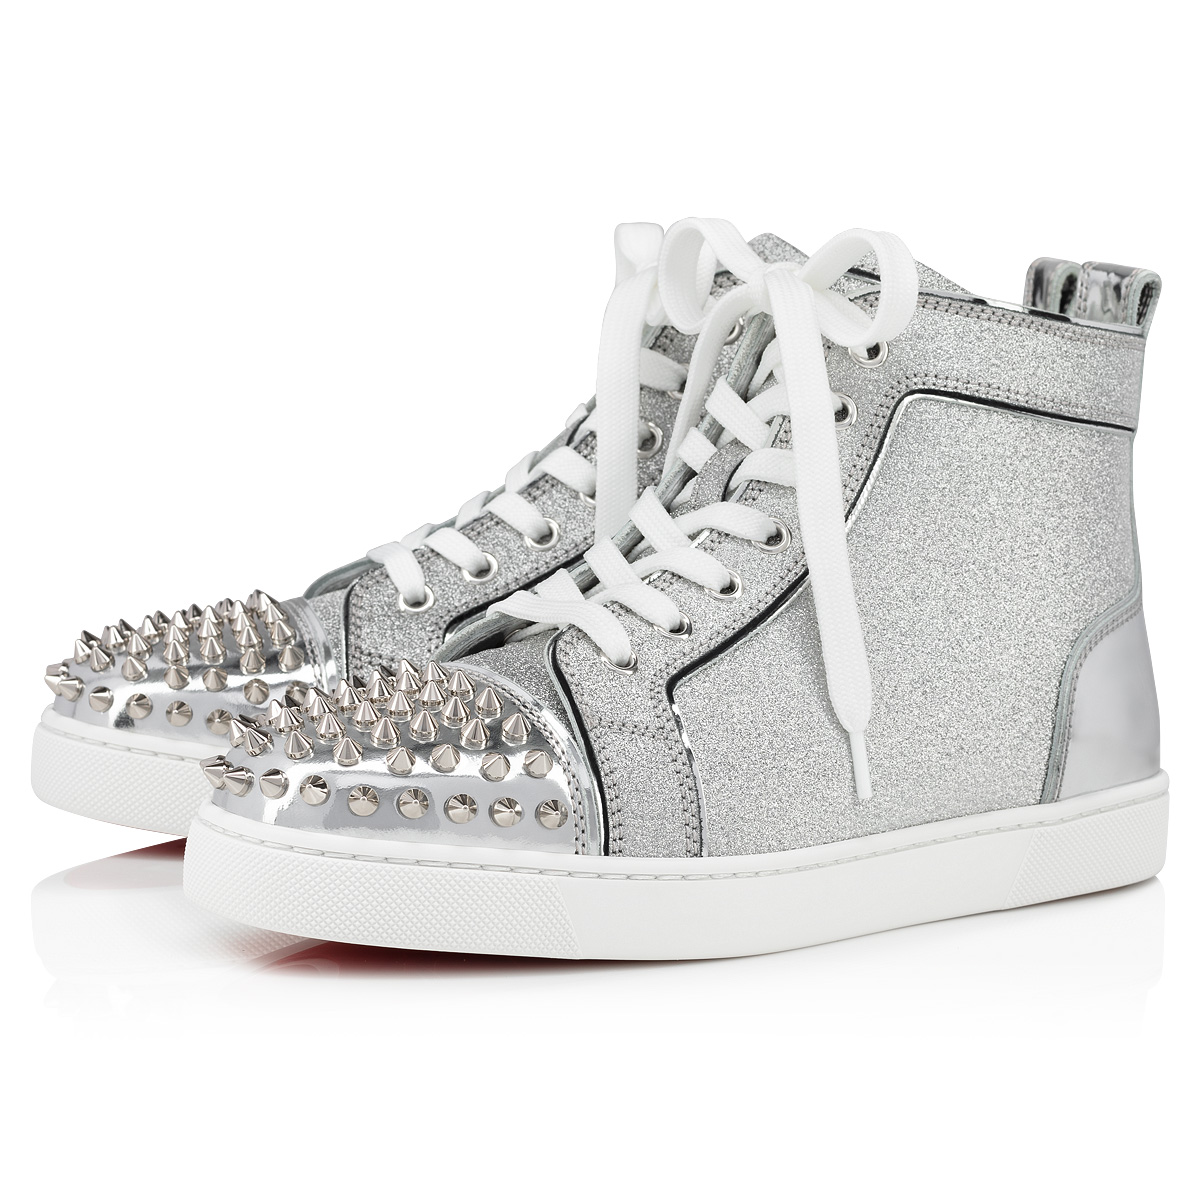 Lou Spikes woman - High-top sneakers - Specchio leather and 